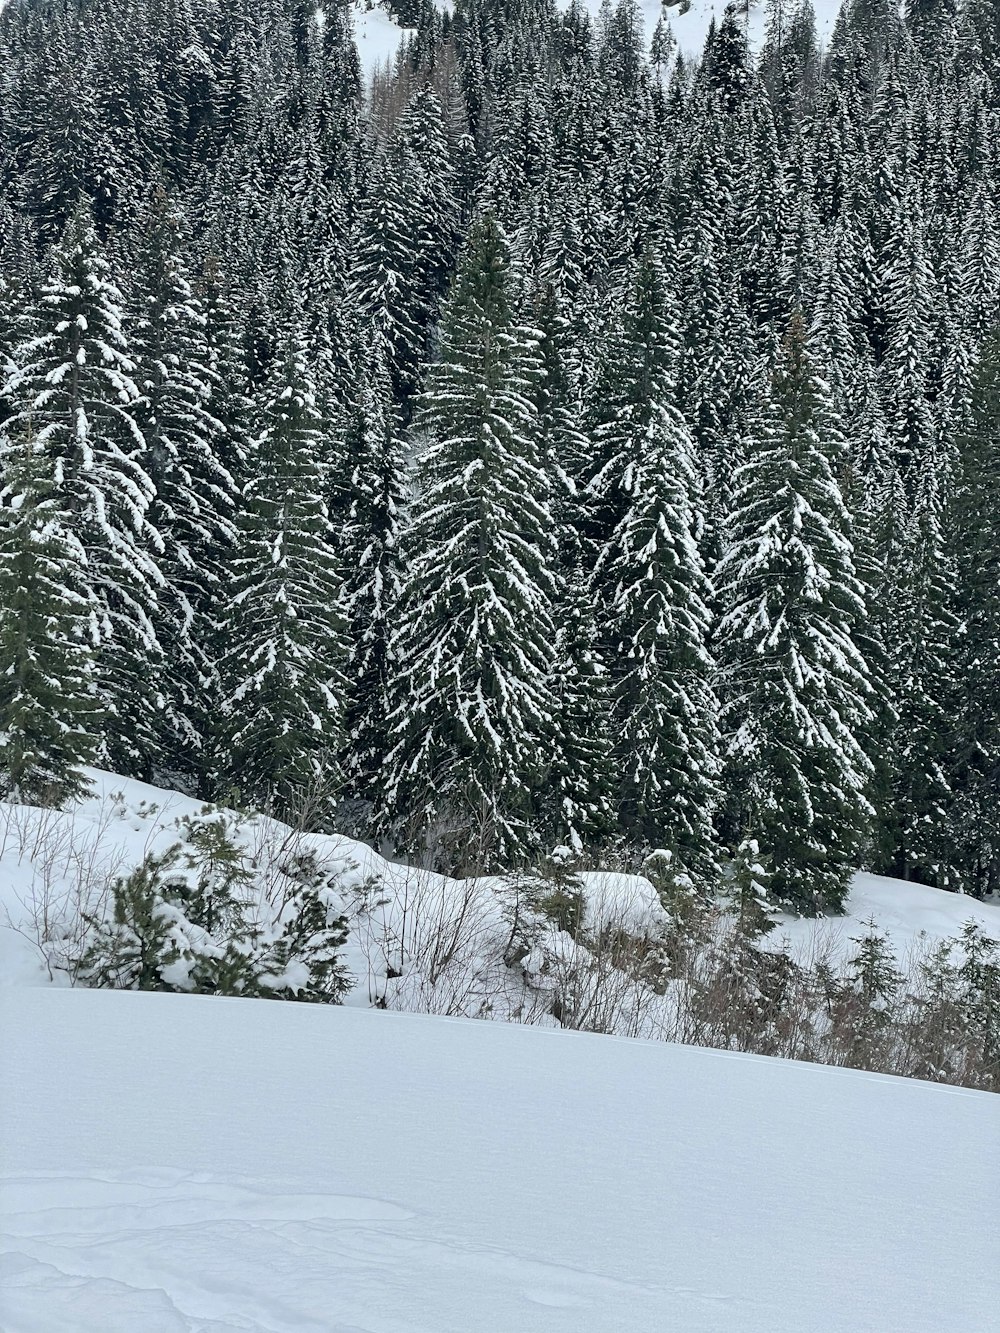 a person on skis in the snow in front of some trees